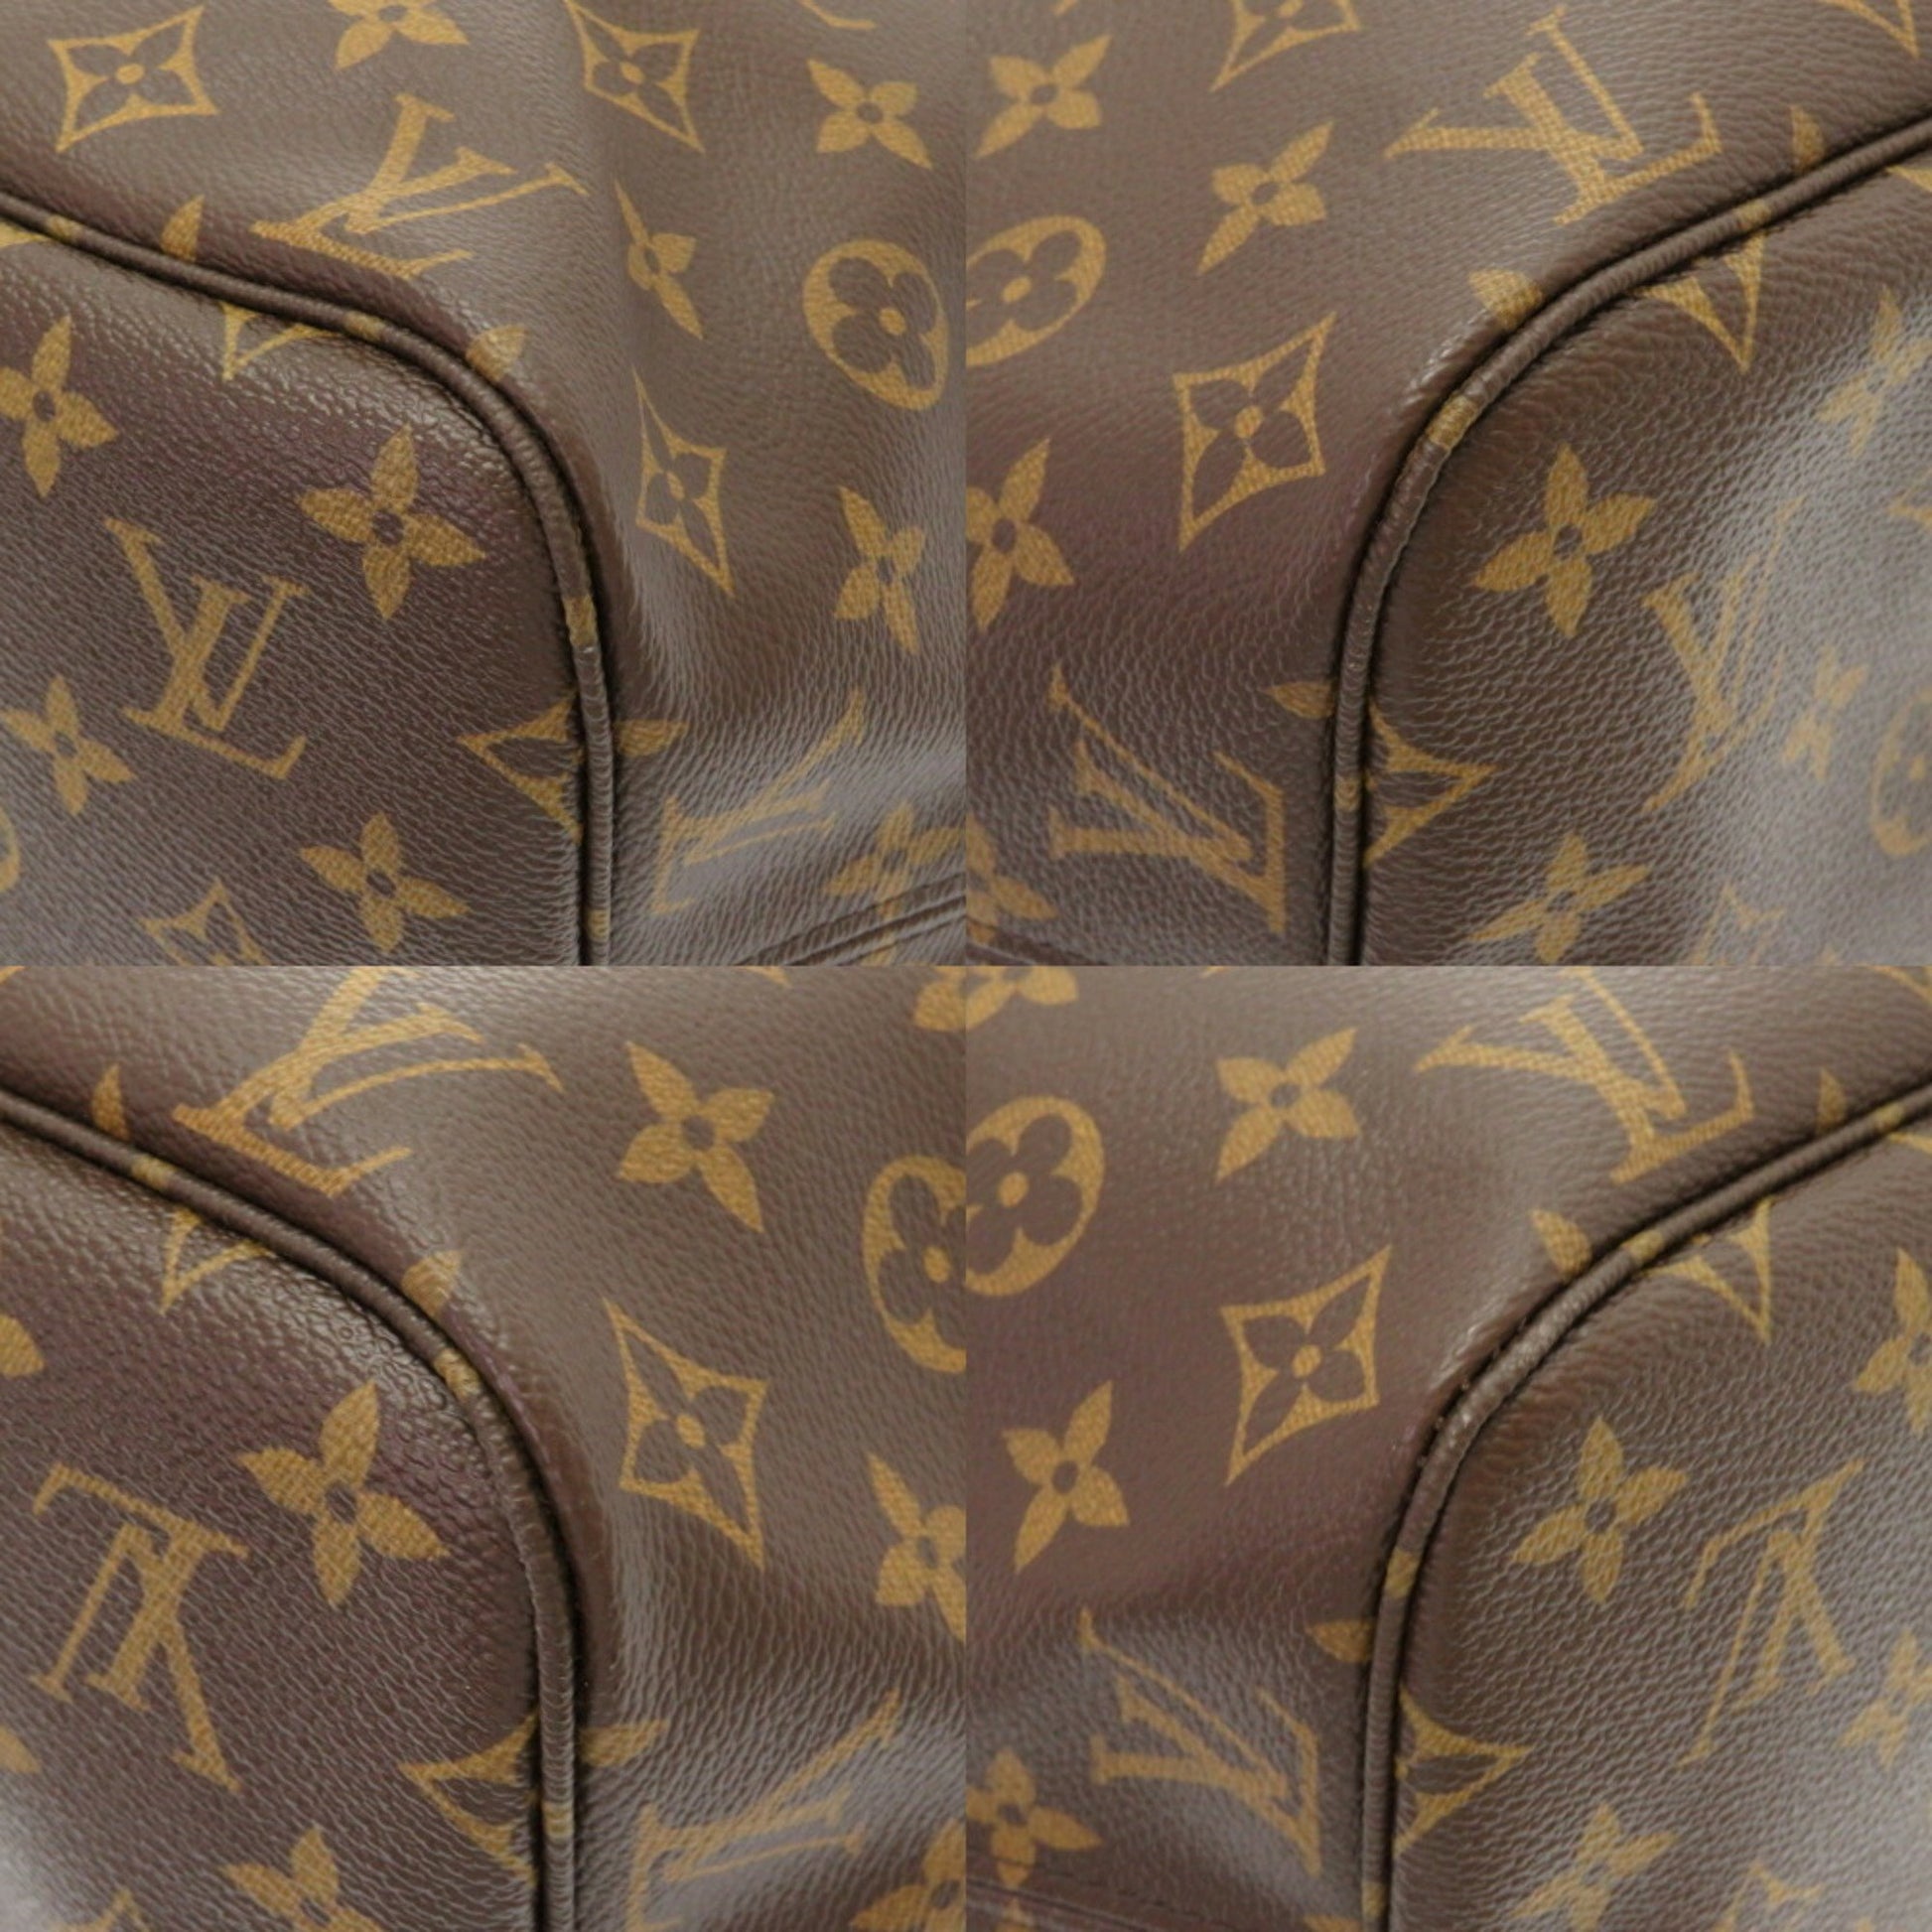 Authenticated Used Louis Vuitton Monogram Neverfull MM M40156 Tote